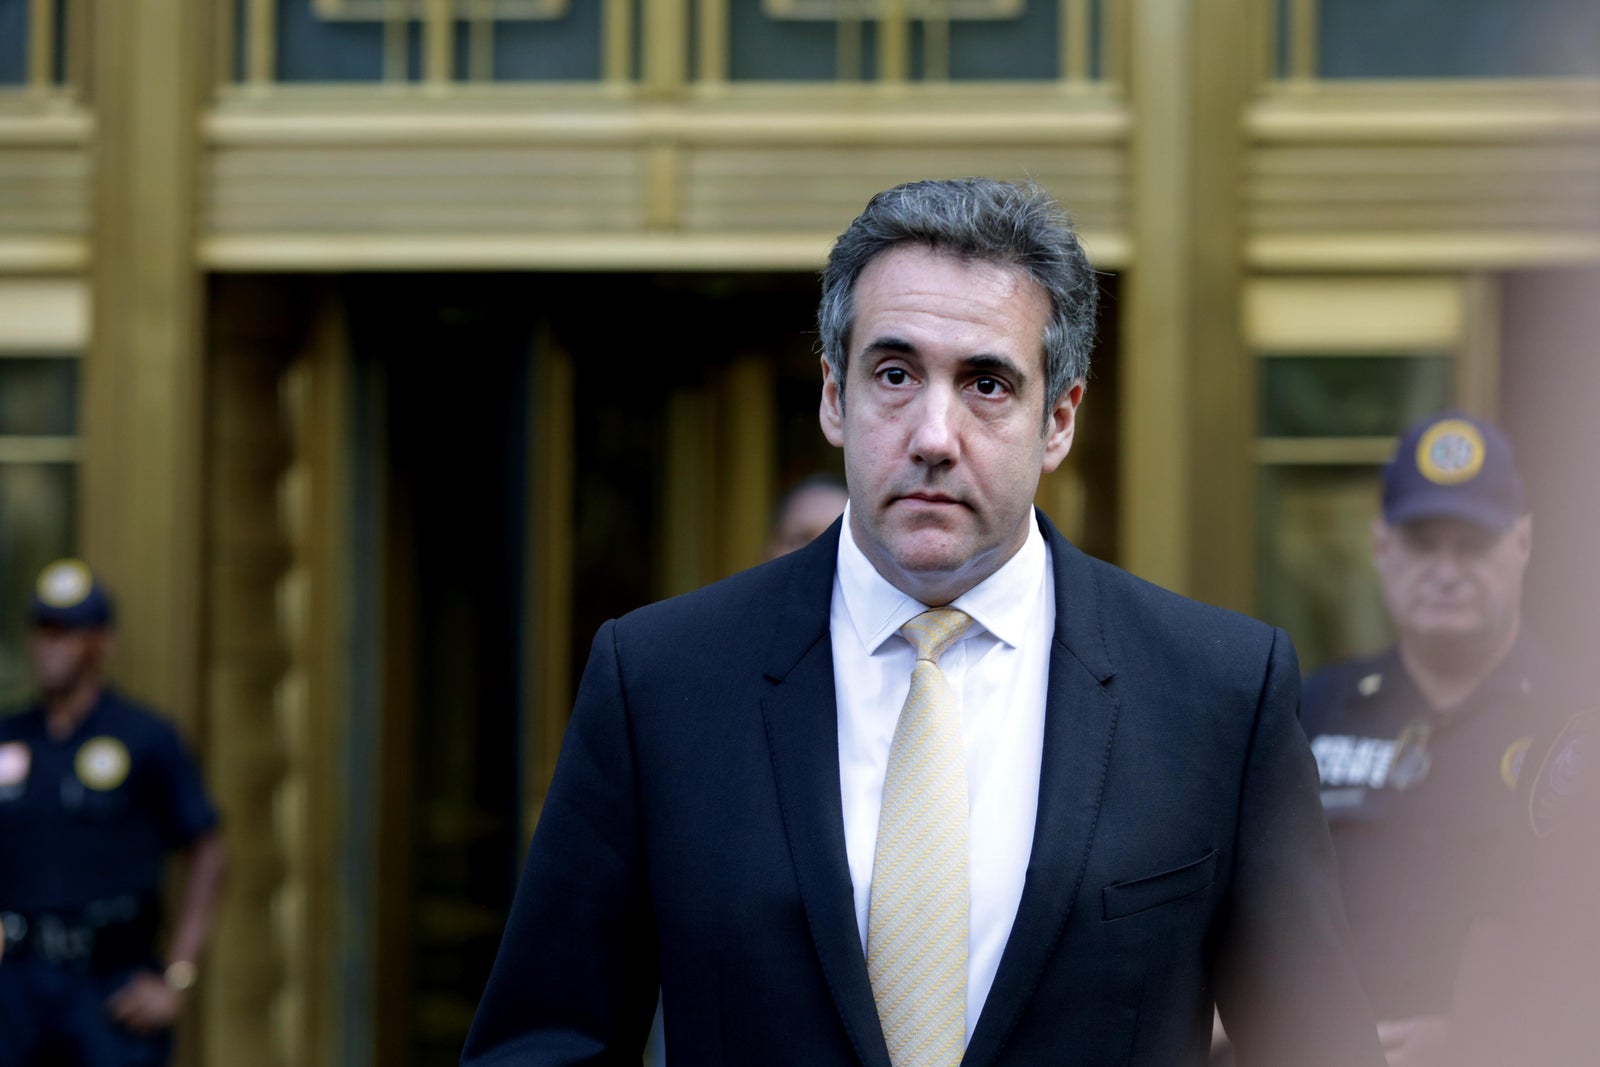 Mueller Probe Michael Cohen Pleads Guilty To Lying To Congress About Trump Tower Project In Moscow 7608